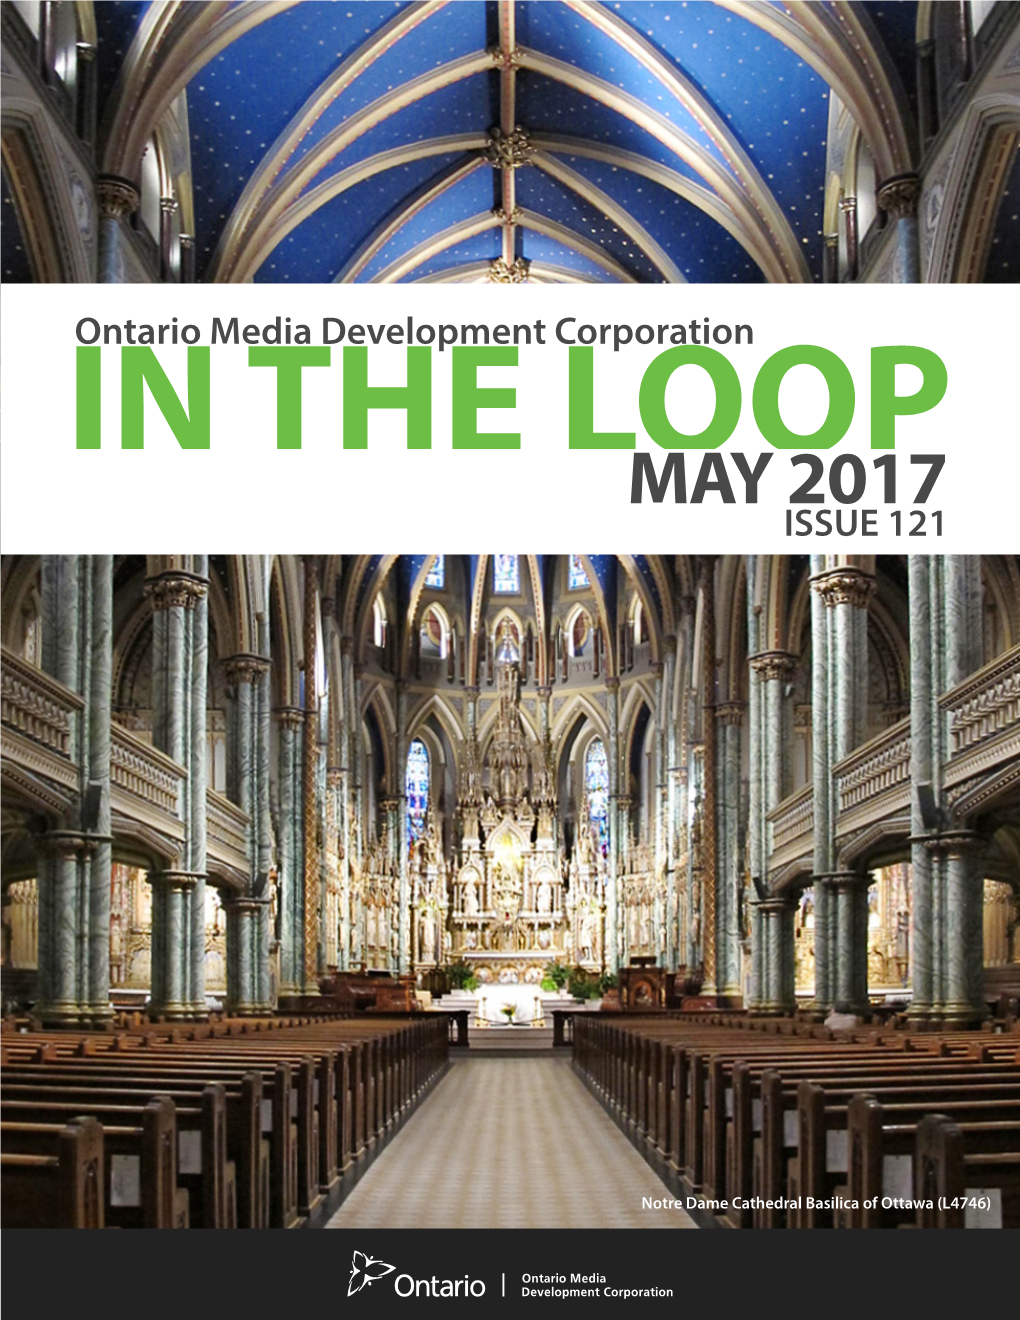 In the Loop Issue 121 May 2017